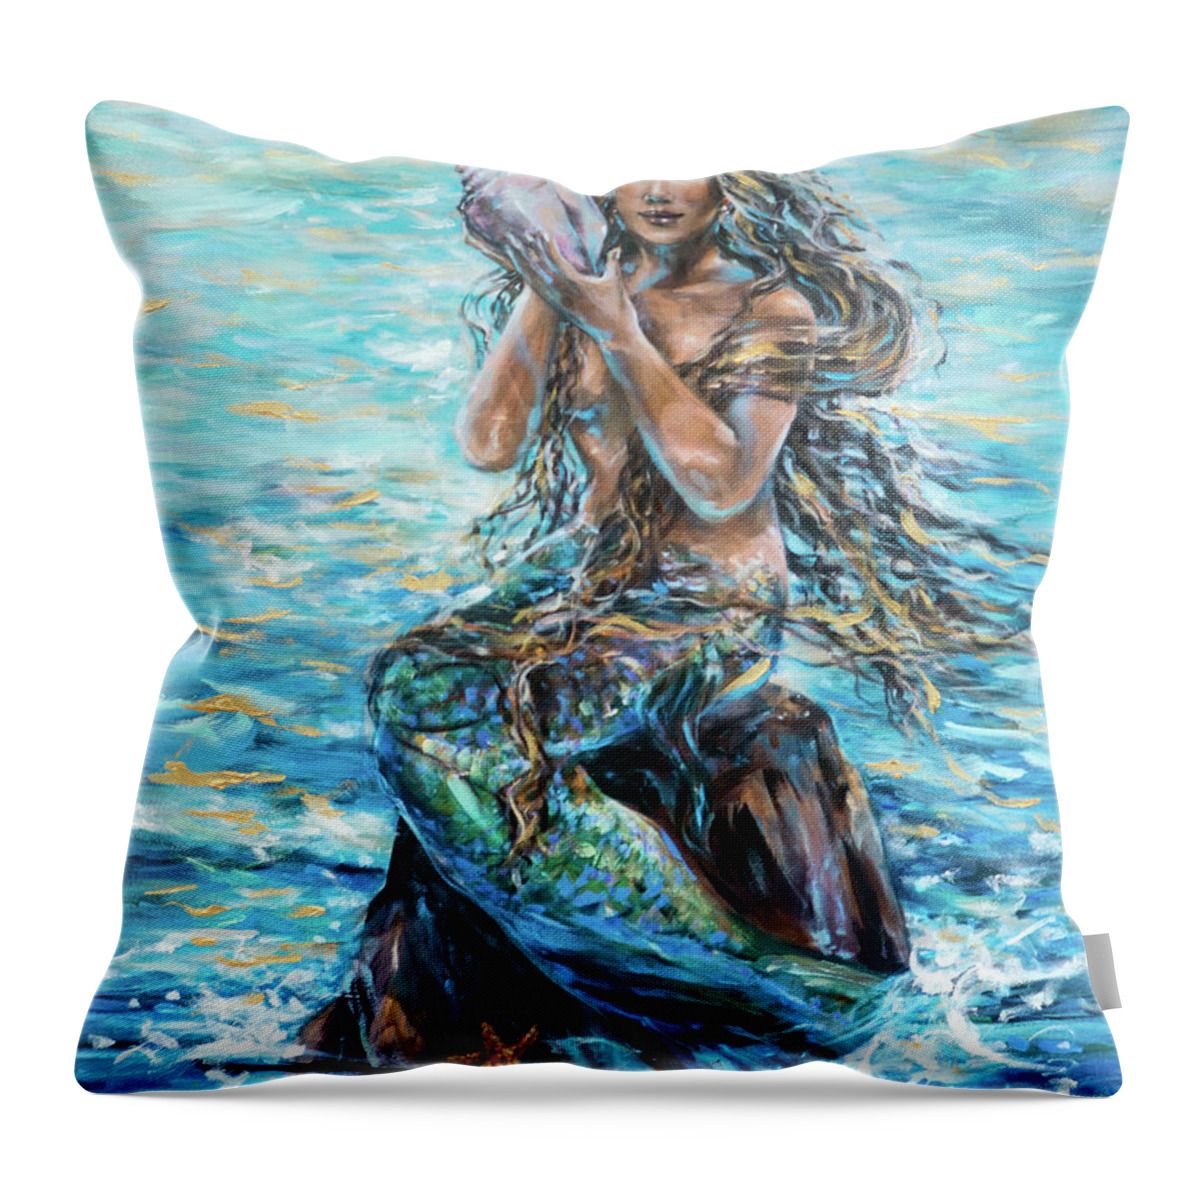 Mermaids Throw Pillow featuring the painting Ariel Study by Linda Olsen